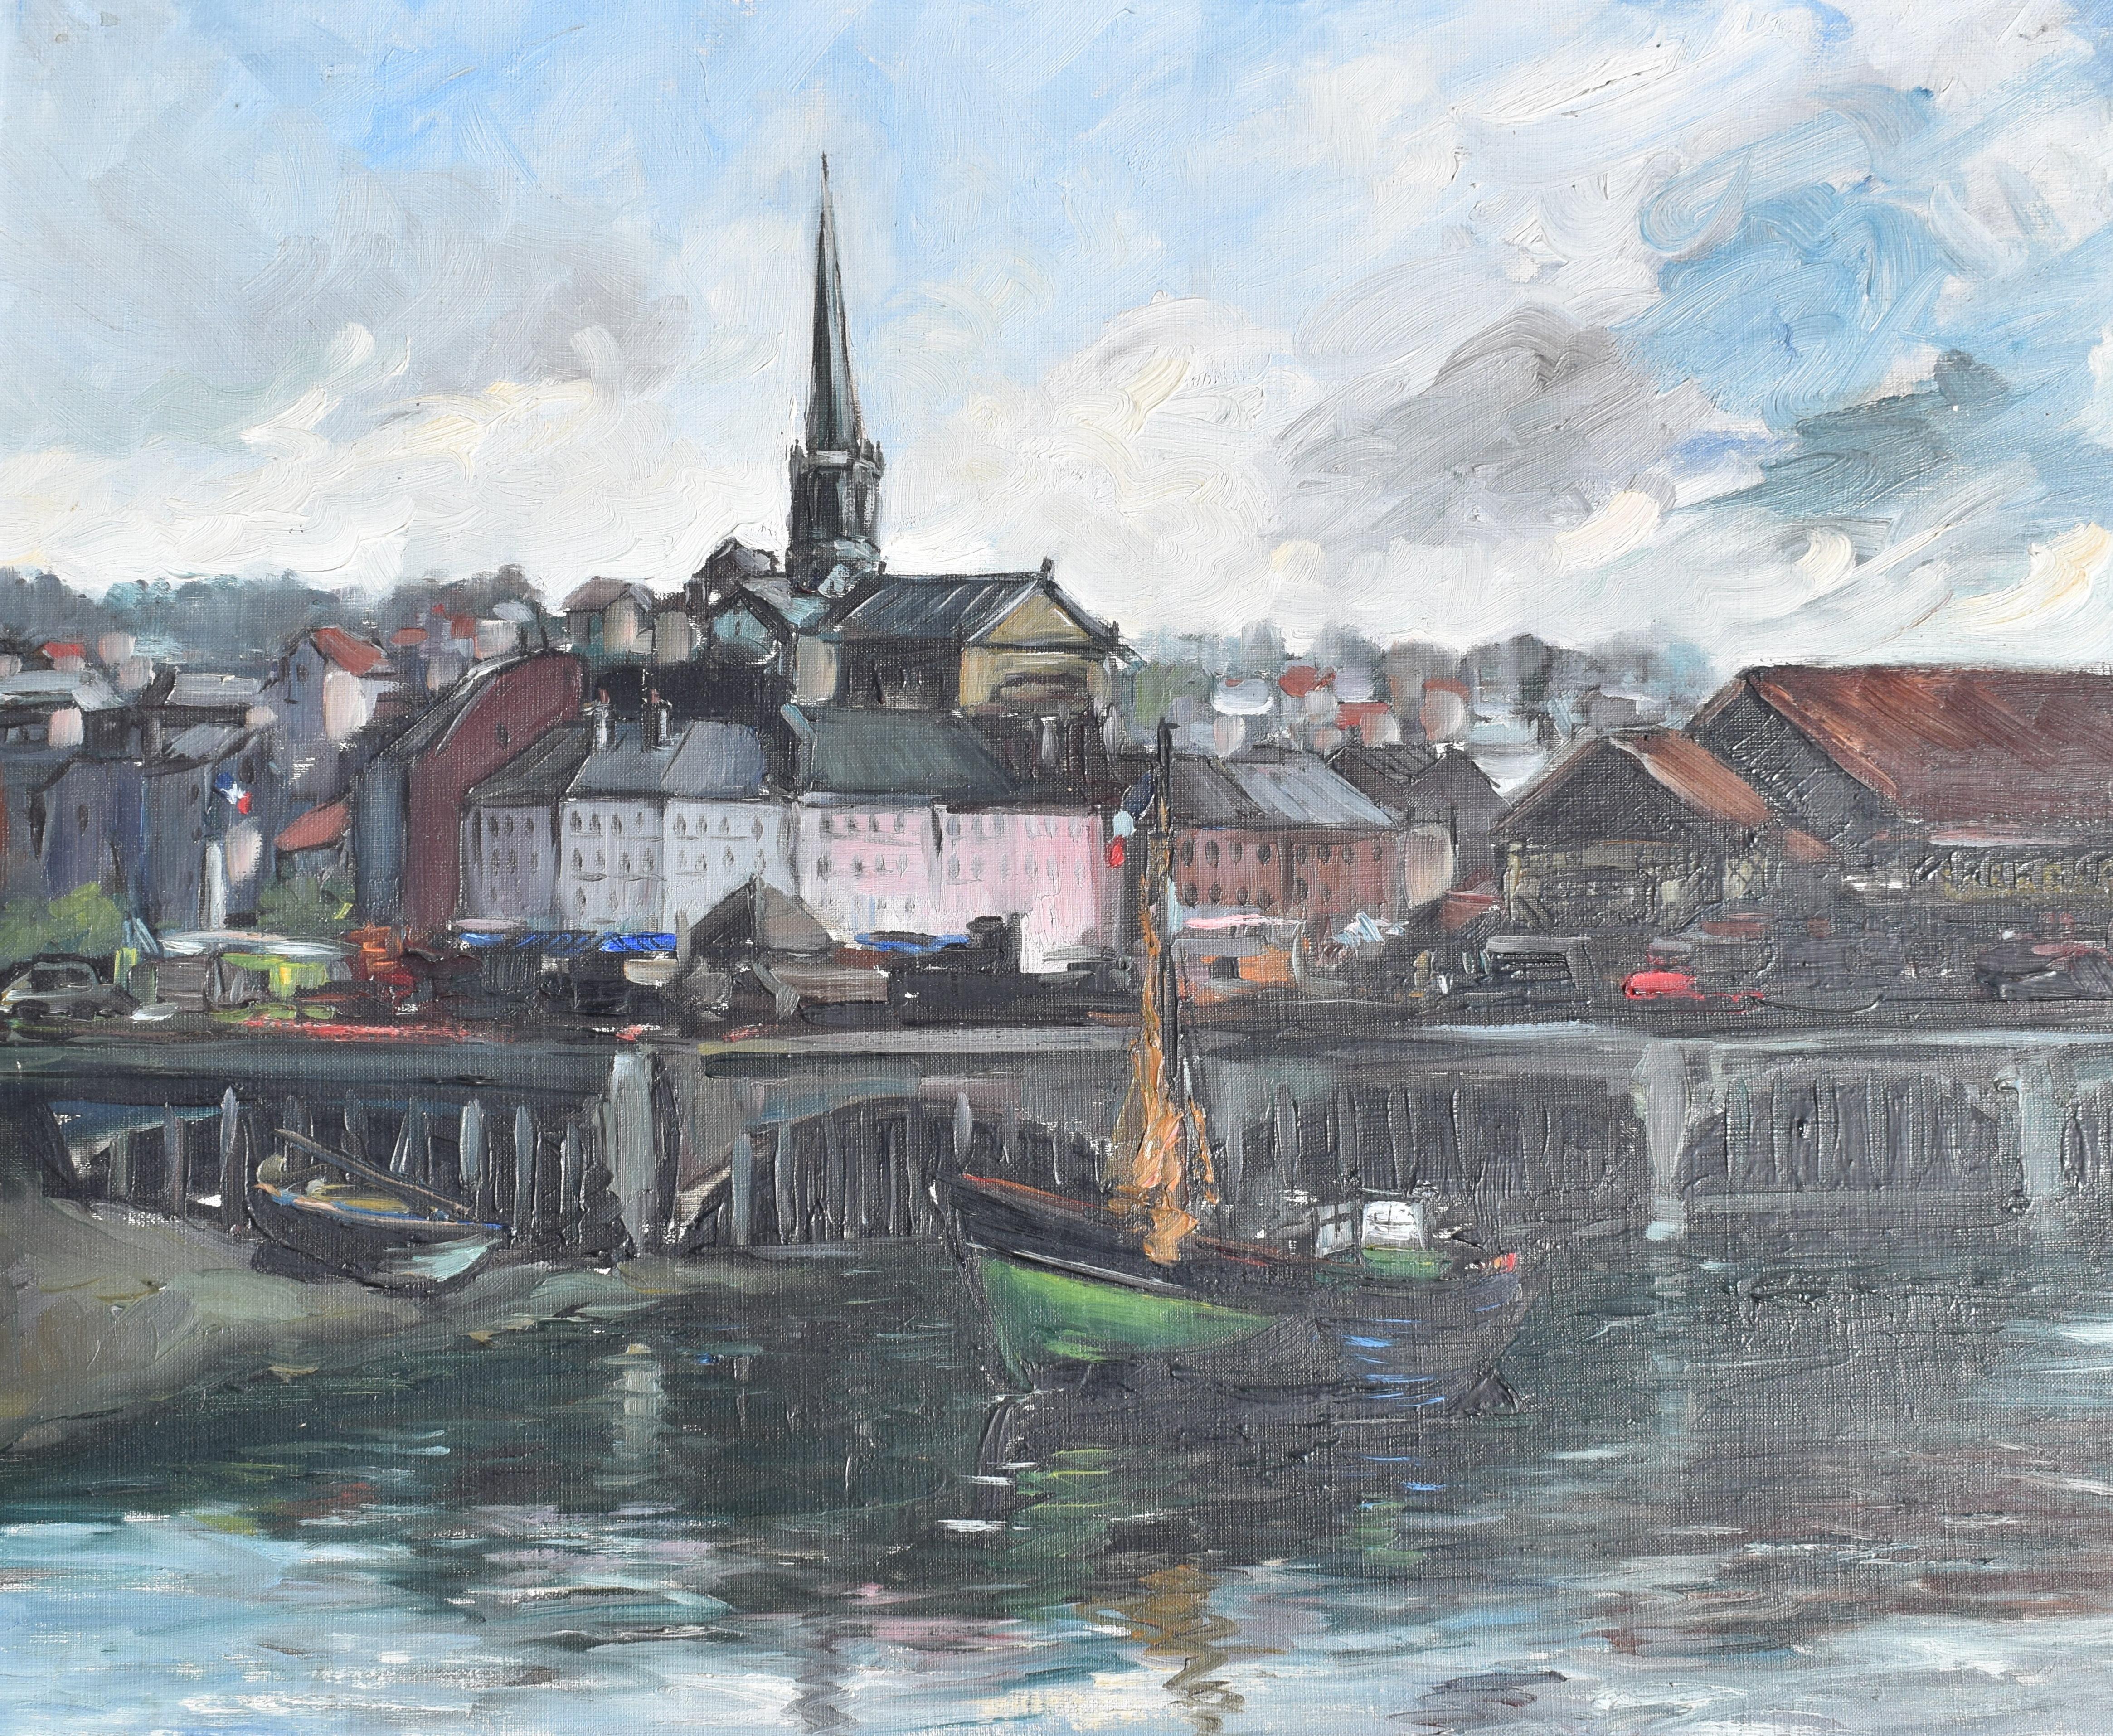 French School Honfleur Follower of Frank Myers BOGGS  (1855-1926)

A pleasing harbour scene depicting Honfleur in Northern France. Painted in an impressionistic style with great spontaneity using the dark brooding colour palette reminiscent of the